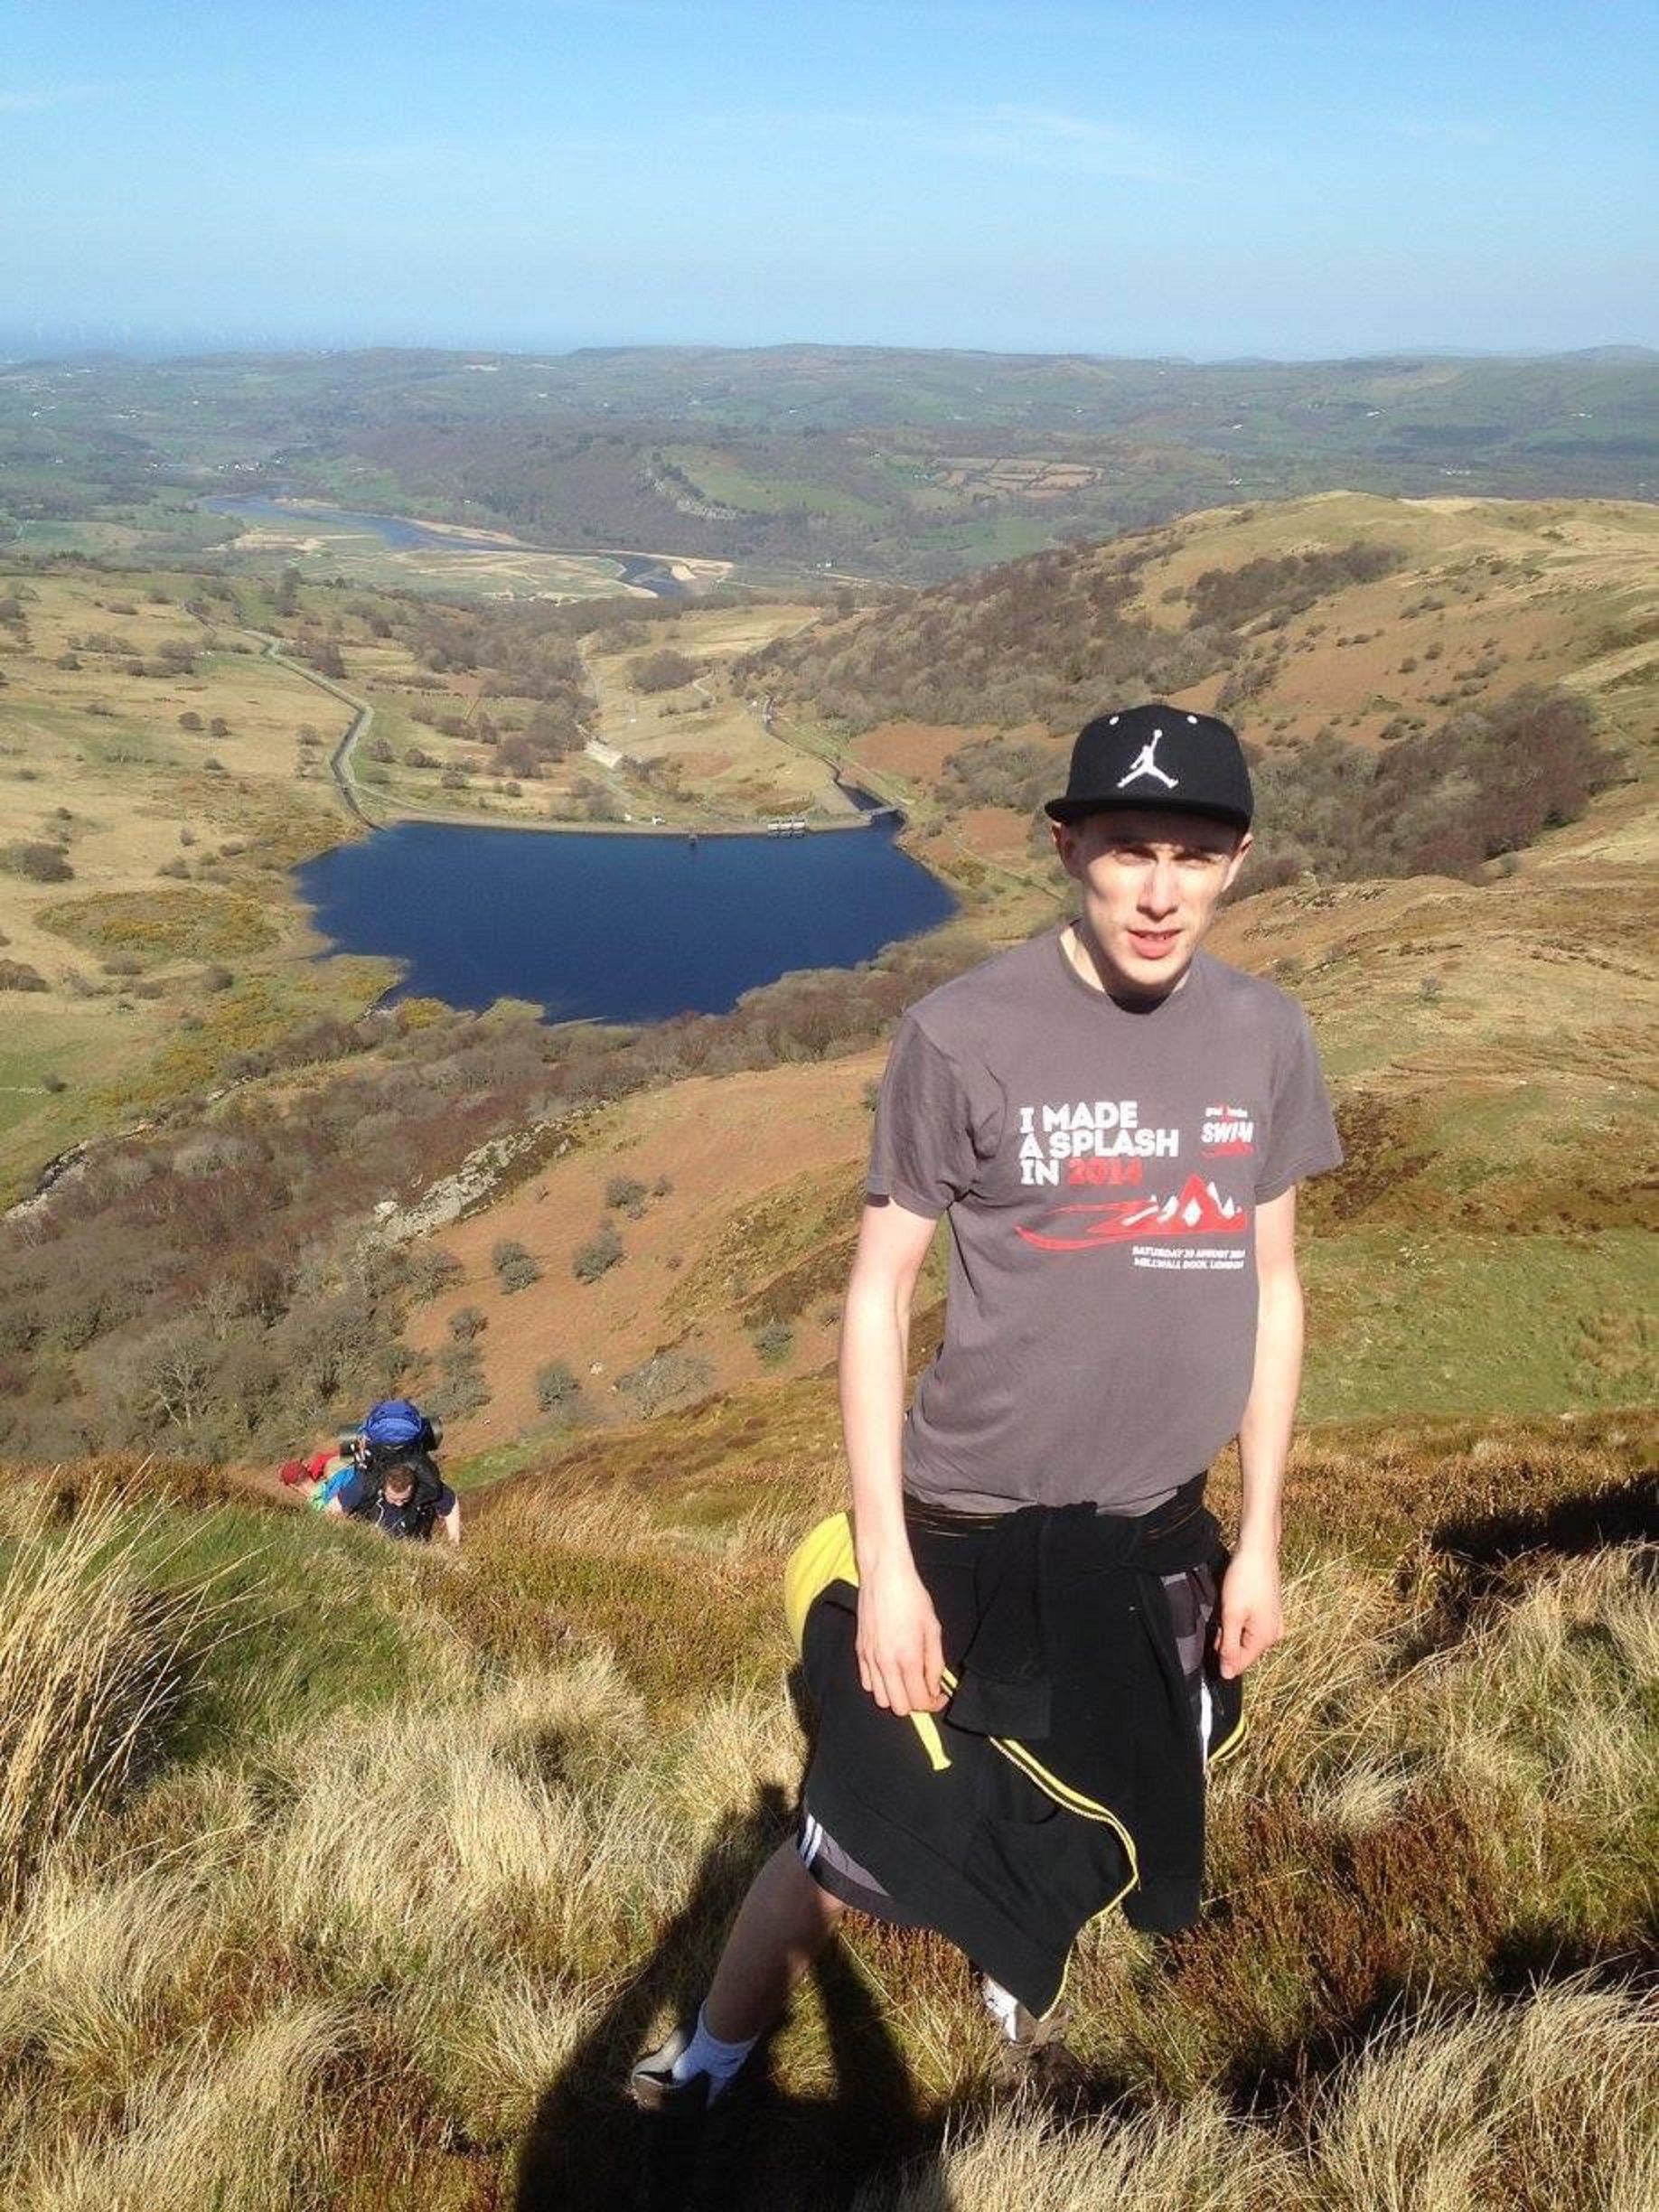 Jack Bayley, 20, stands on a hill, wearing a grey t-shirt and a black cap